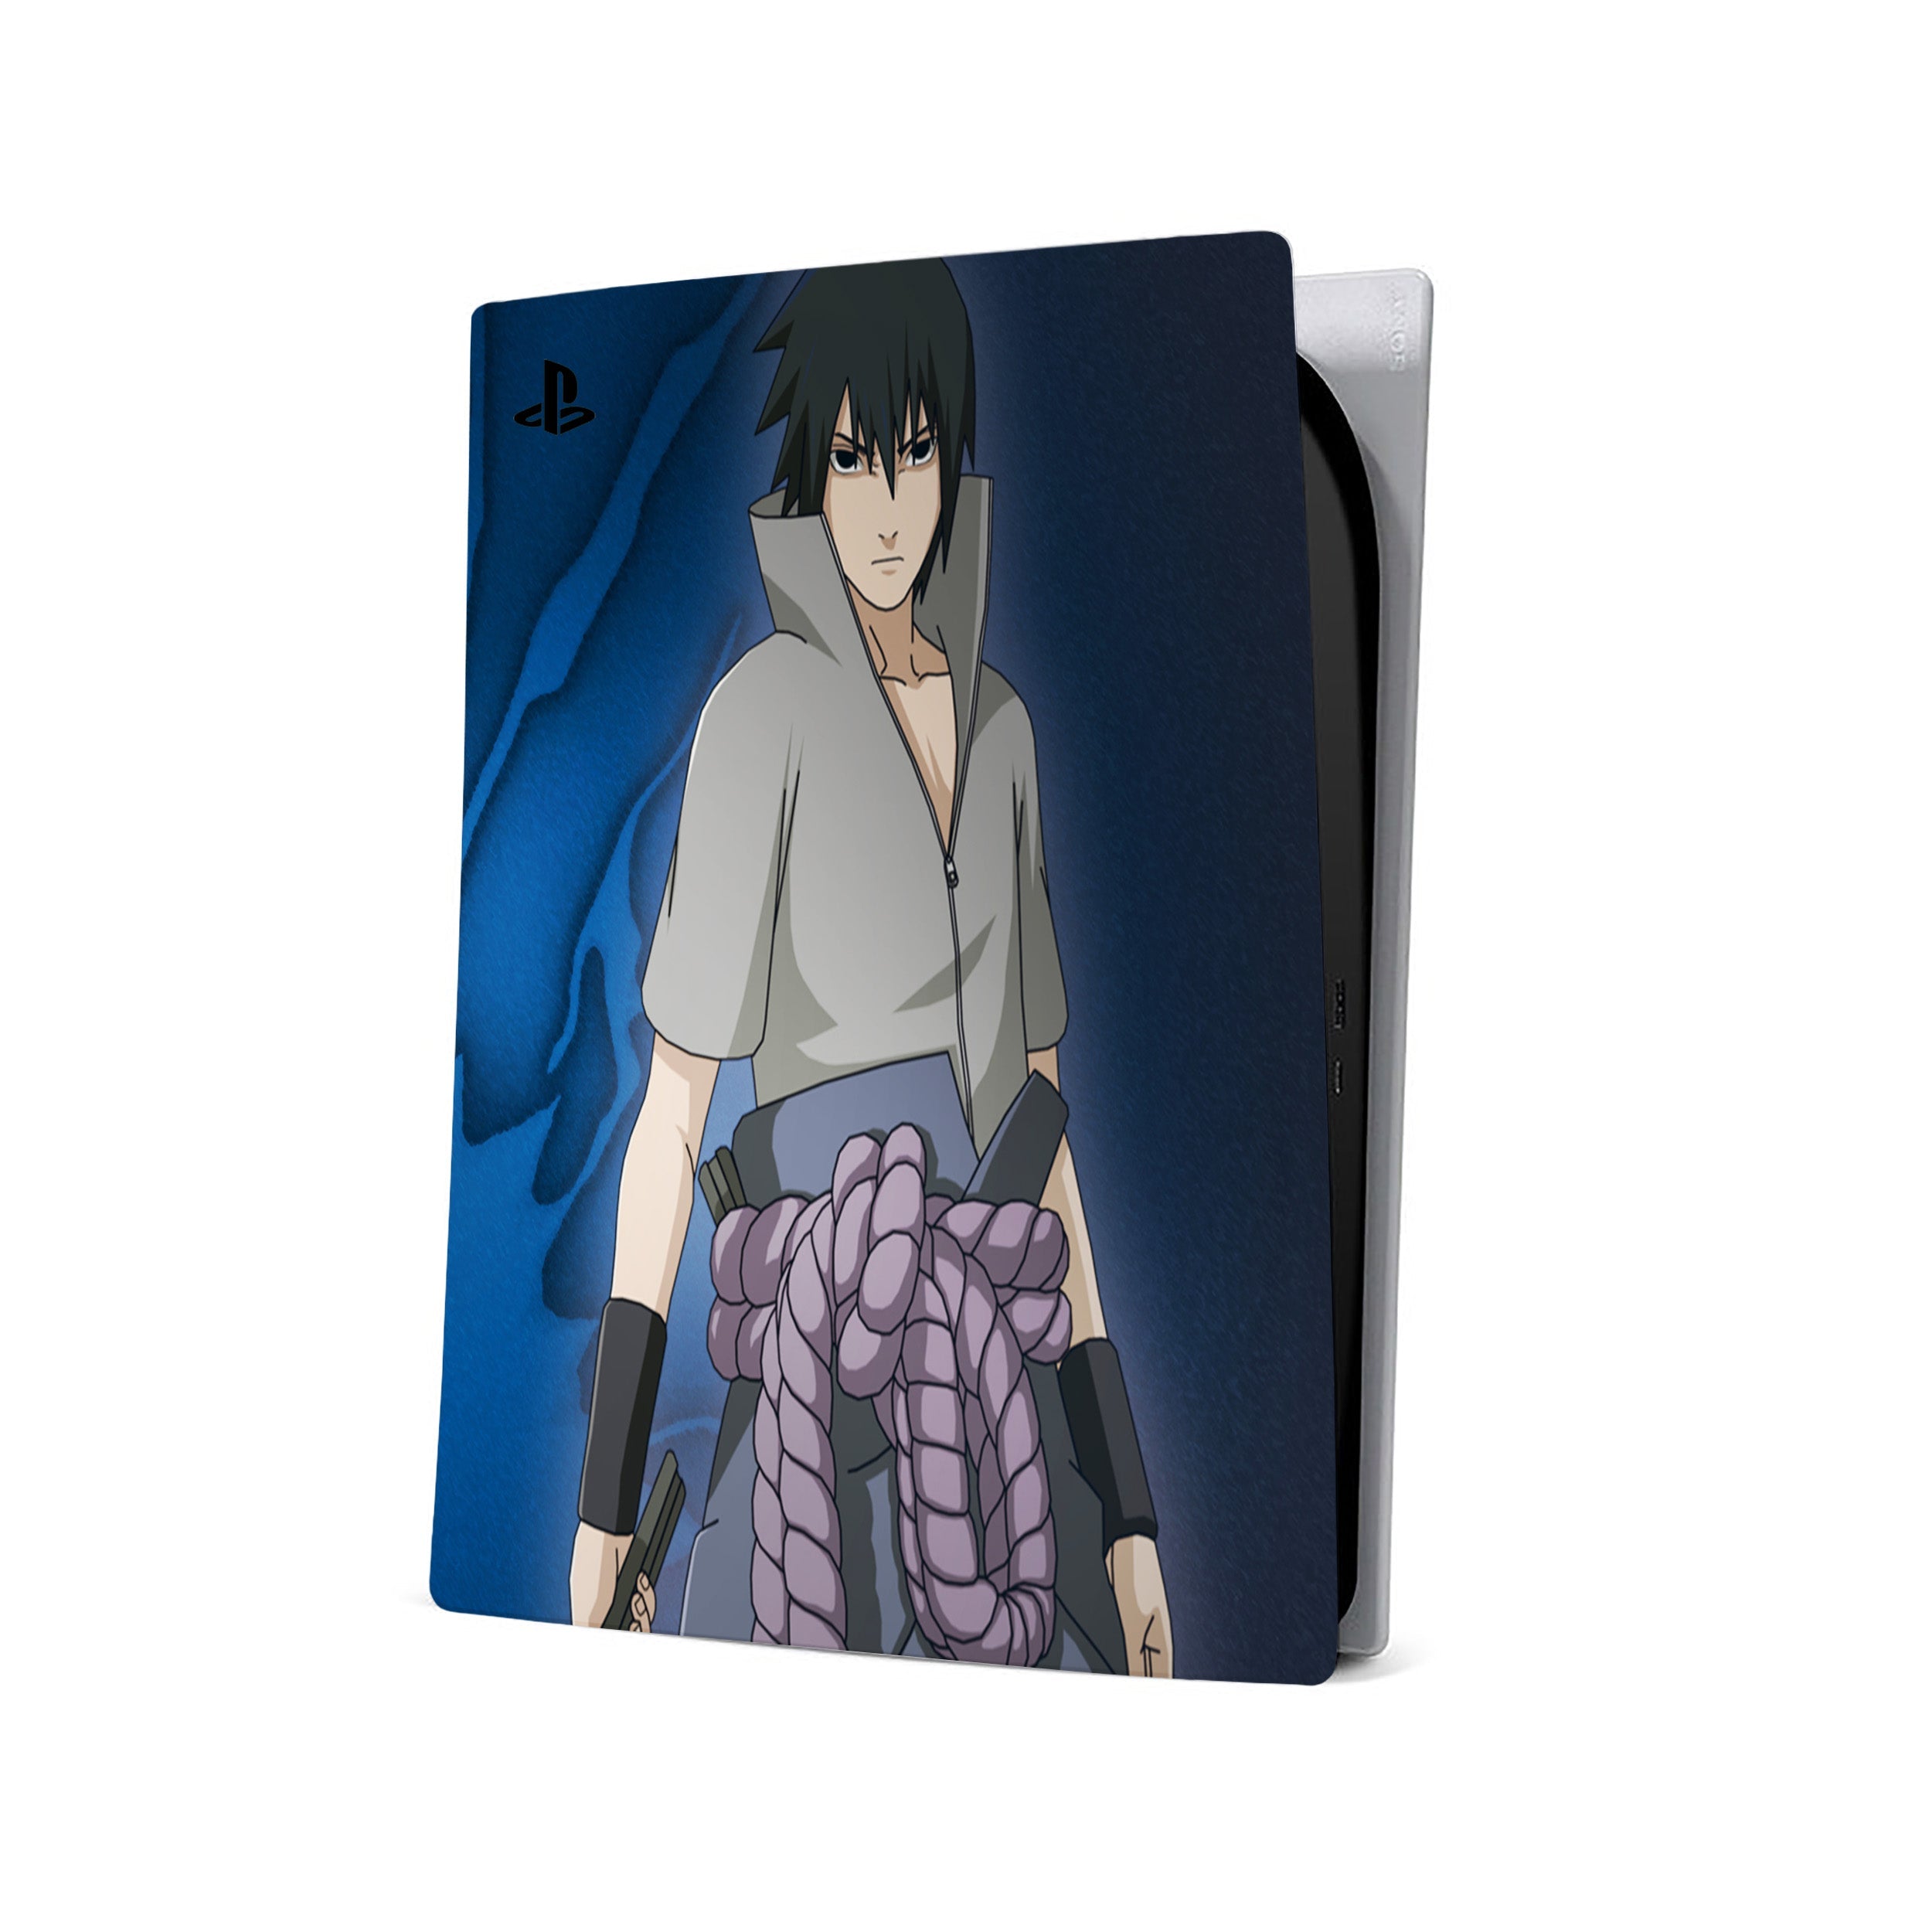 A video game skin featuring a Naruto Sasuke design for the PS5.